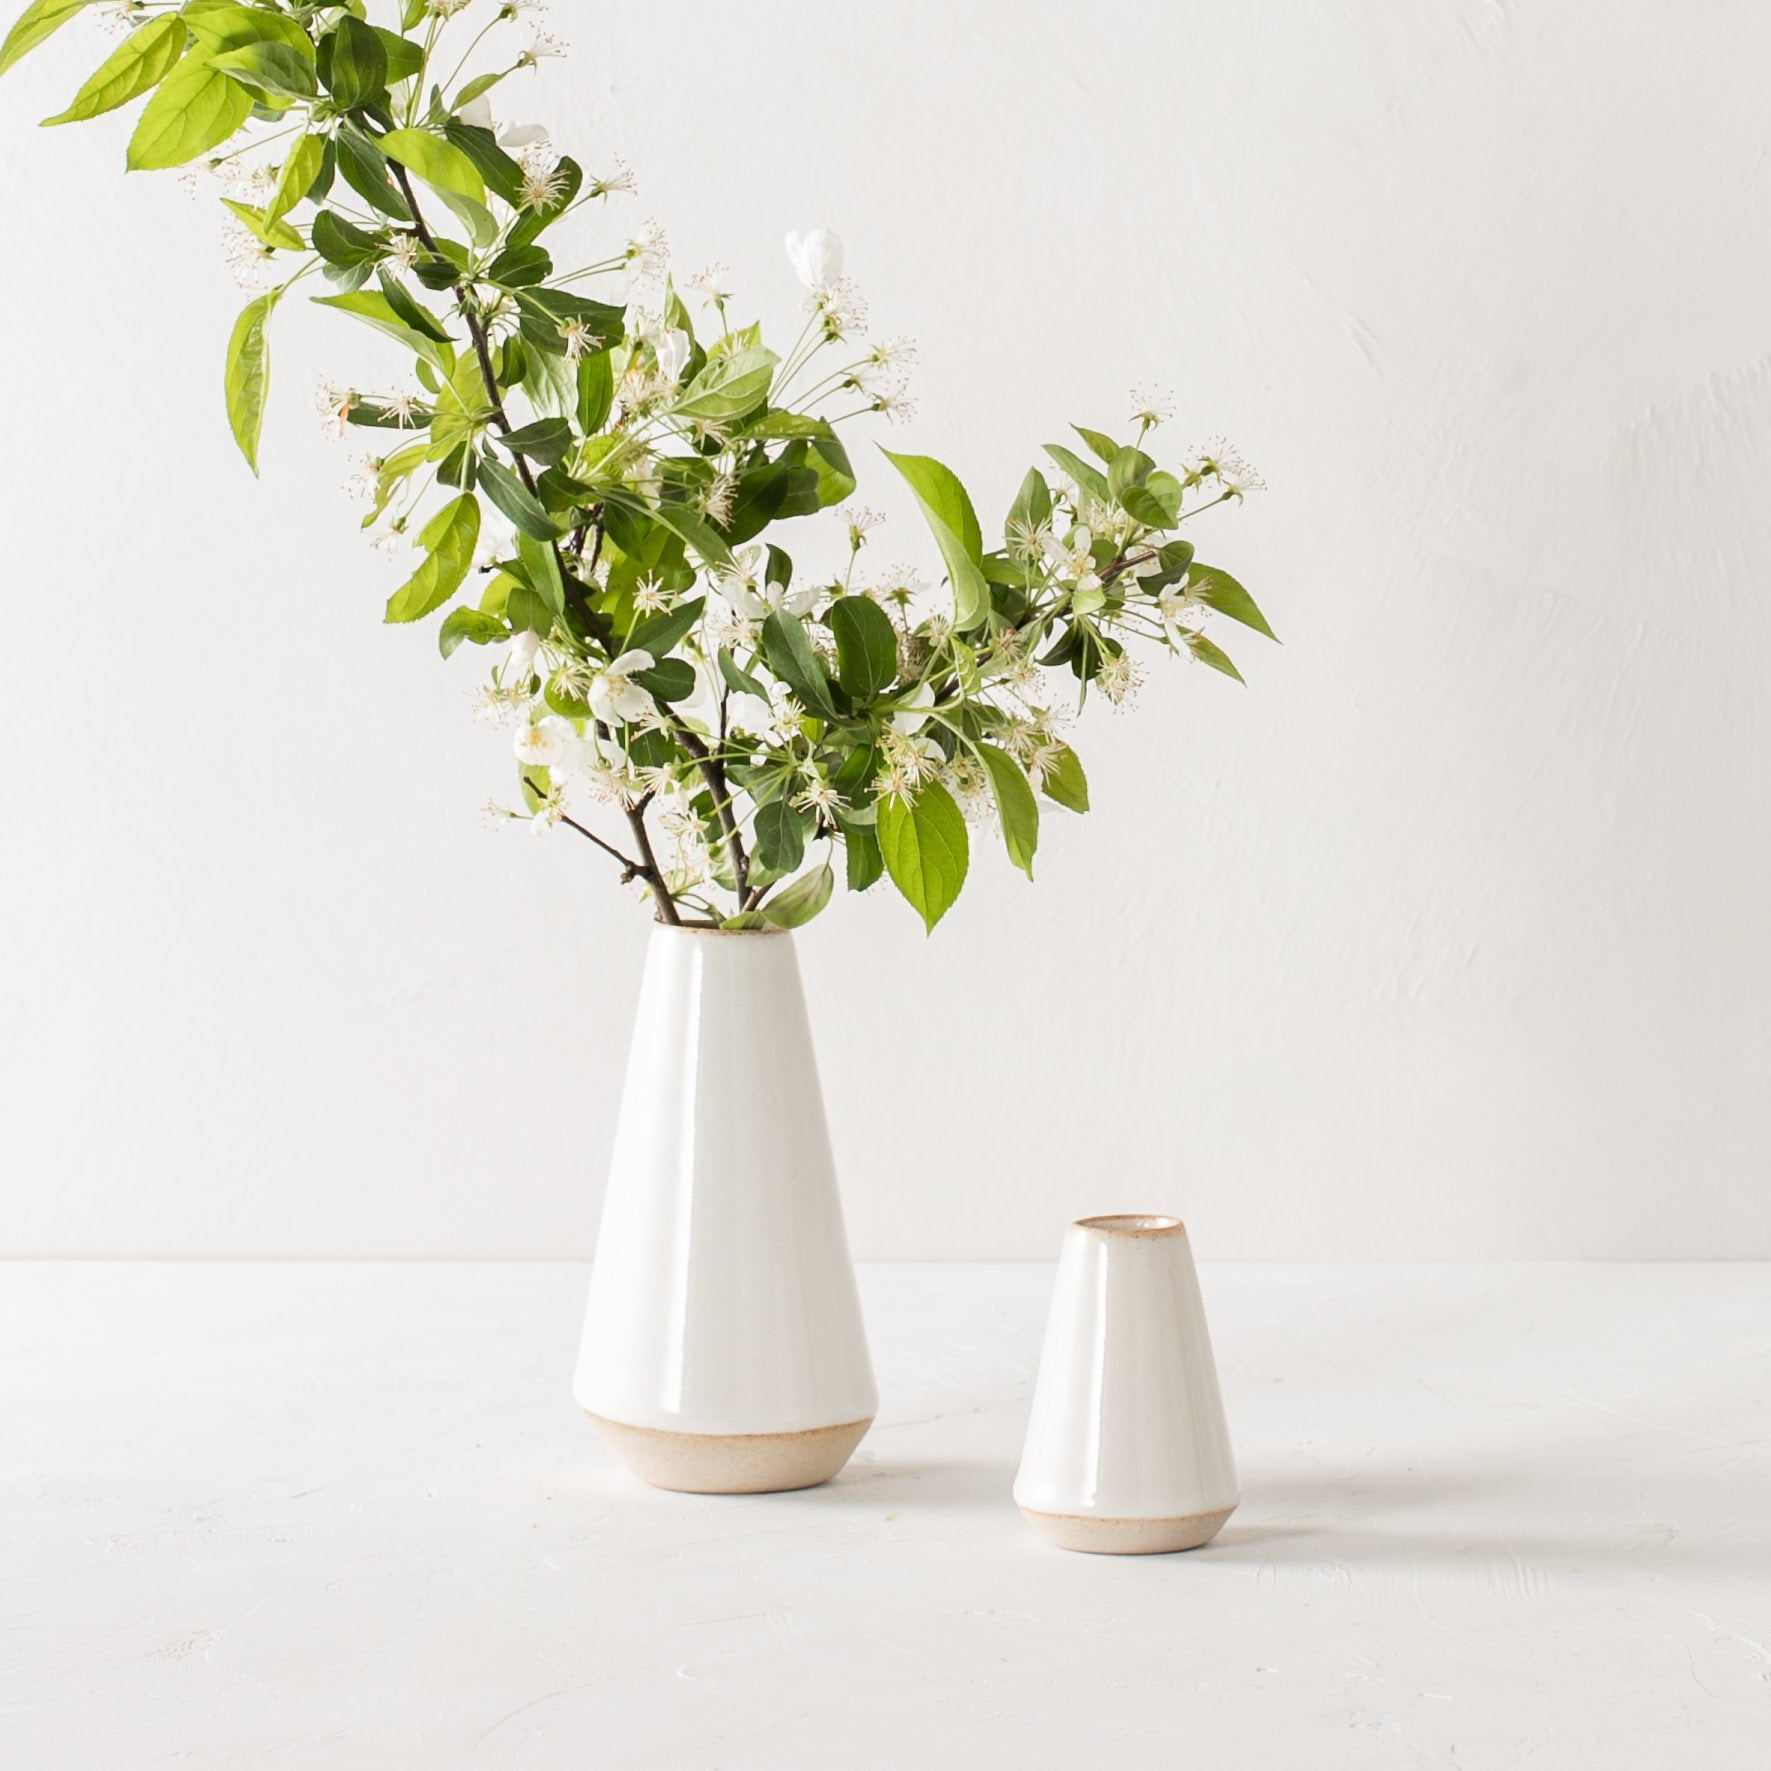 Two minimal white tapered bud vases side by side, seven inch and 4 in. 7 inch has a white blossom branch inside. Handmade ceramic bud vase designed and sold by Convivial Production, Kansas City ceramics.